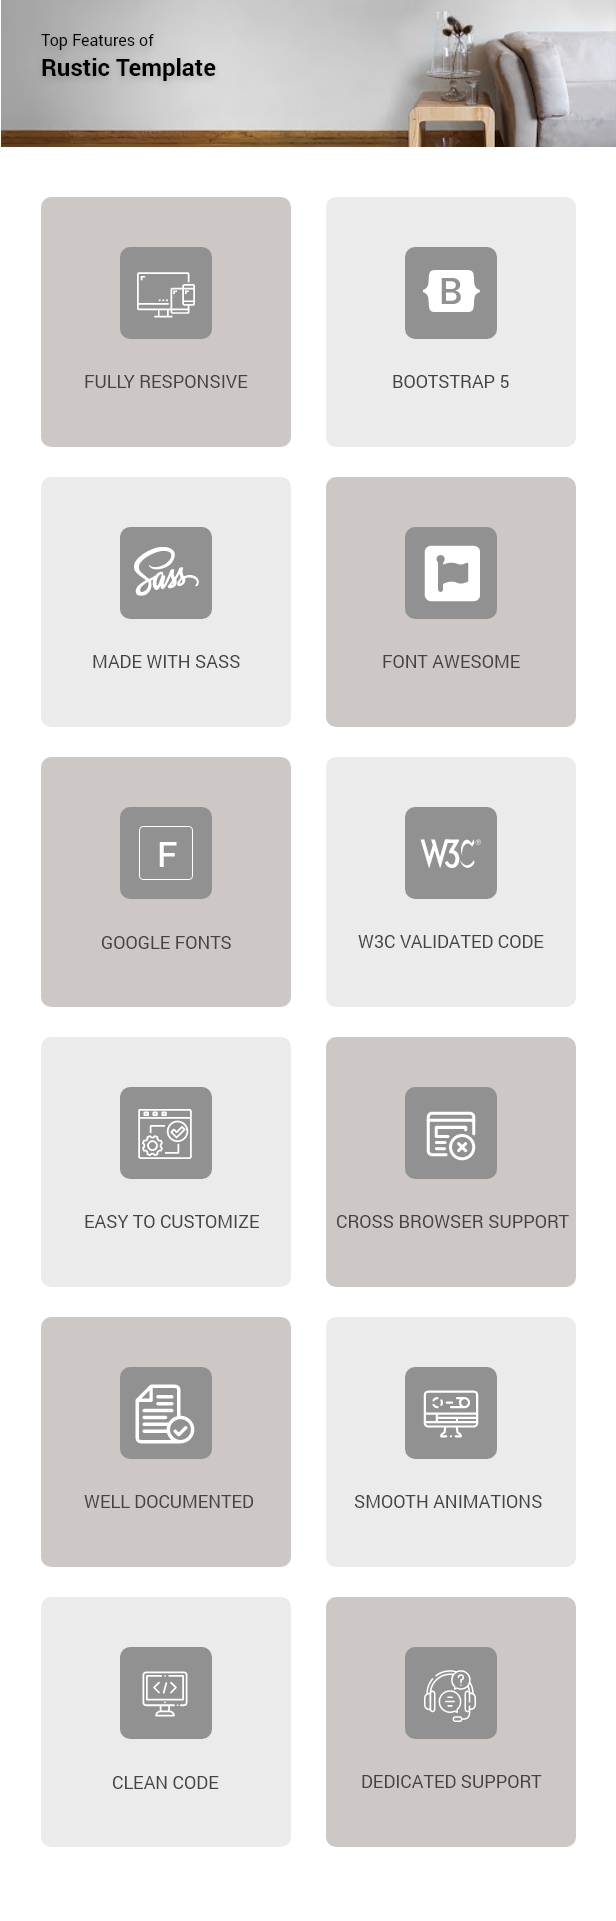 Rustic - Corporate Bootstrap 5 HTML Template - 2